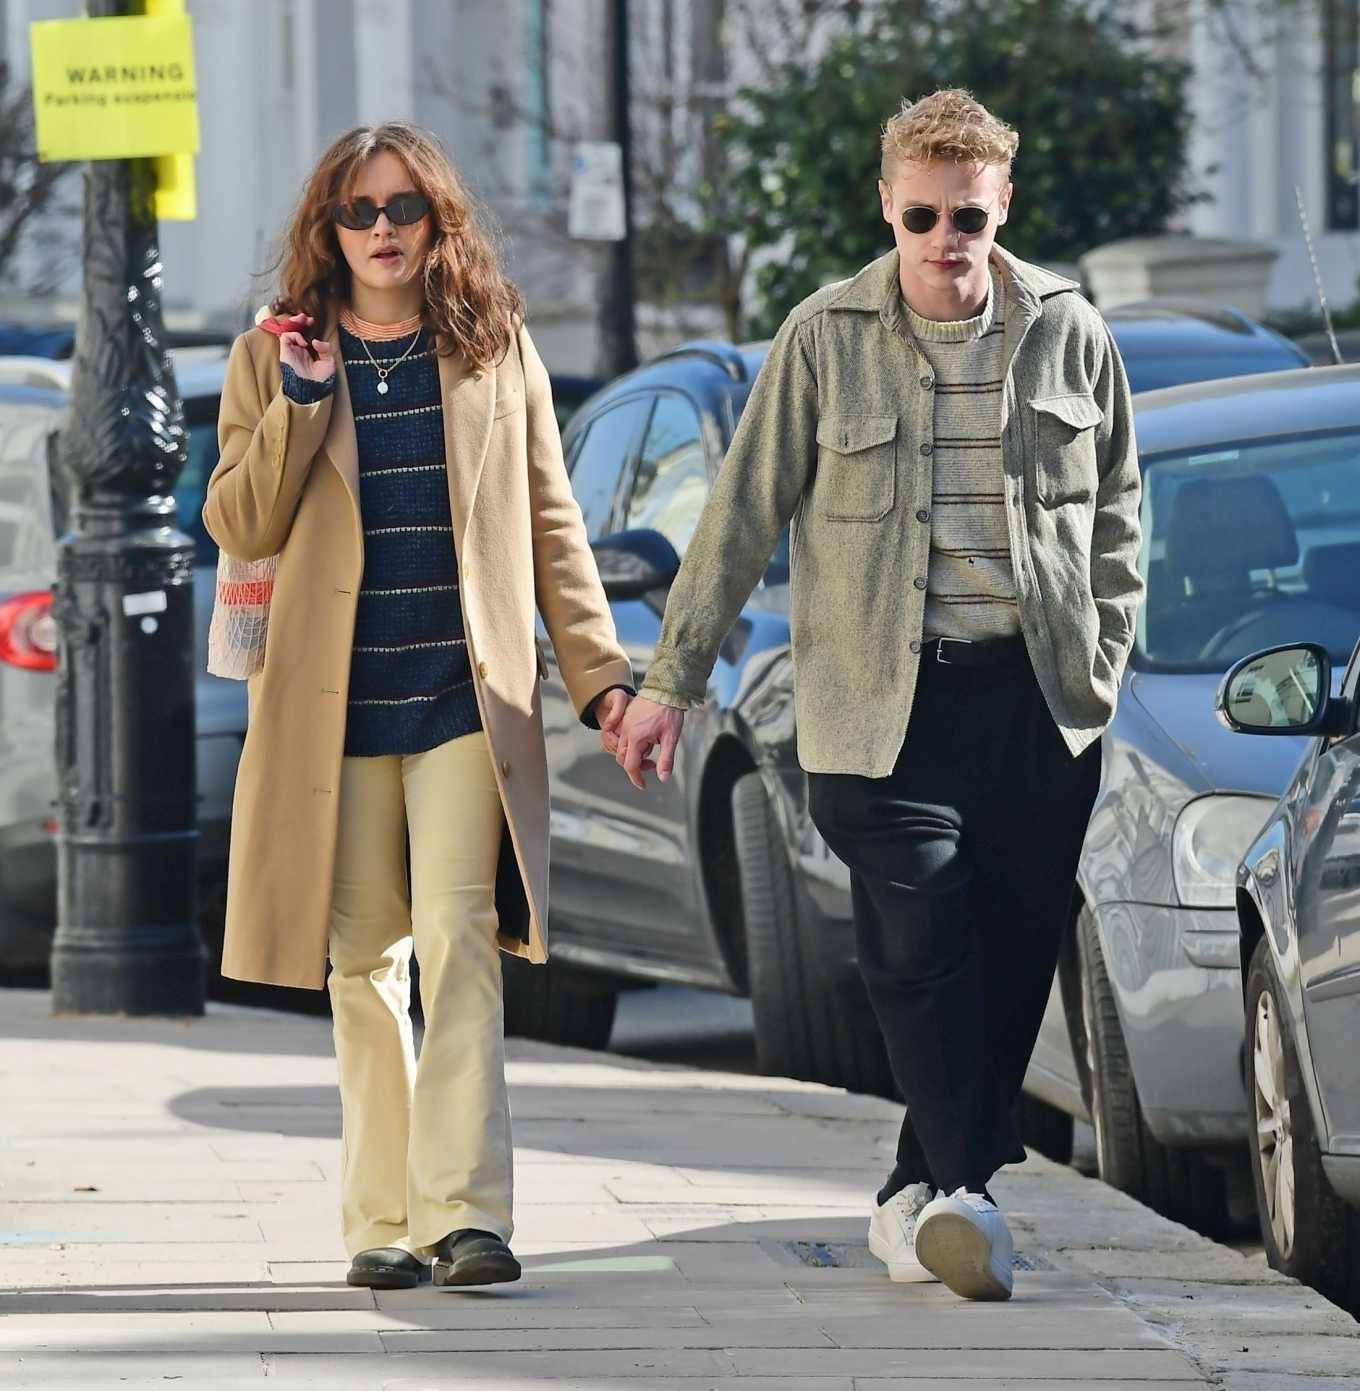 Olivia Cooke and Ben Hardy â€“ Shares a kiss out in London